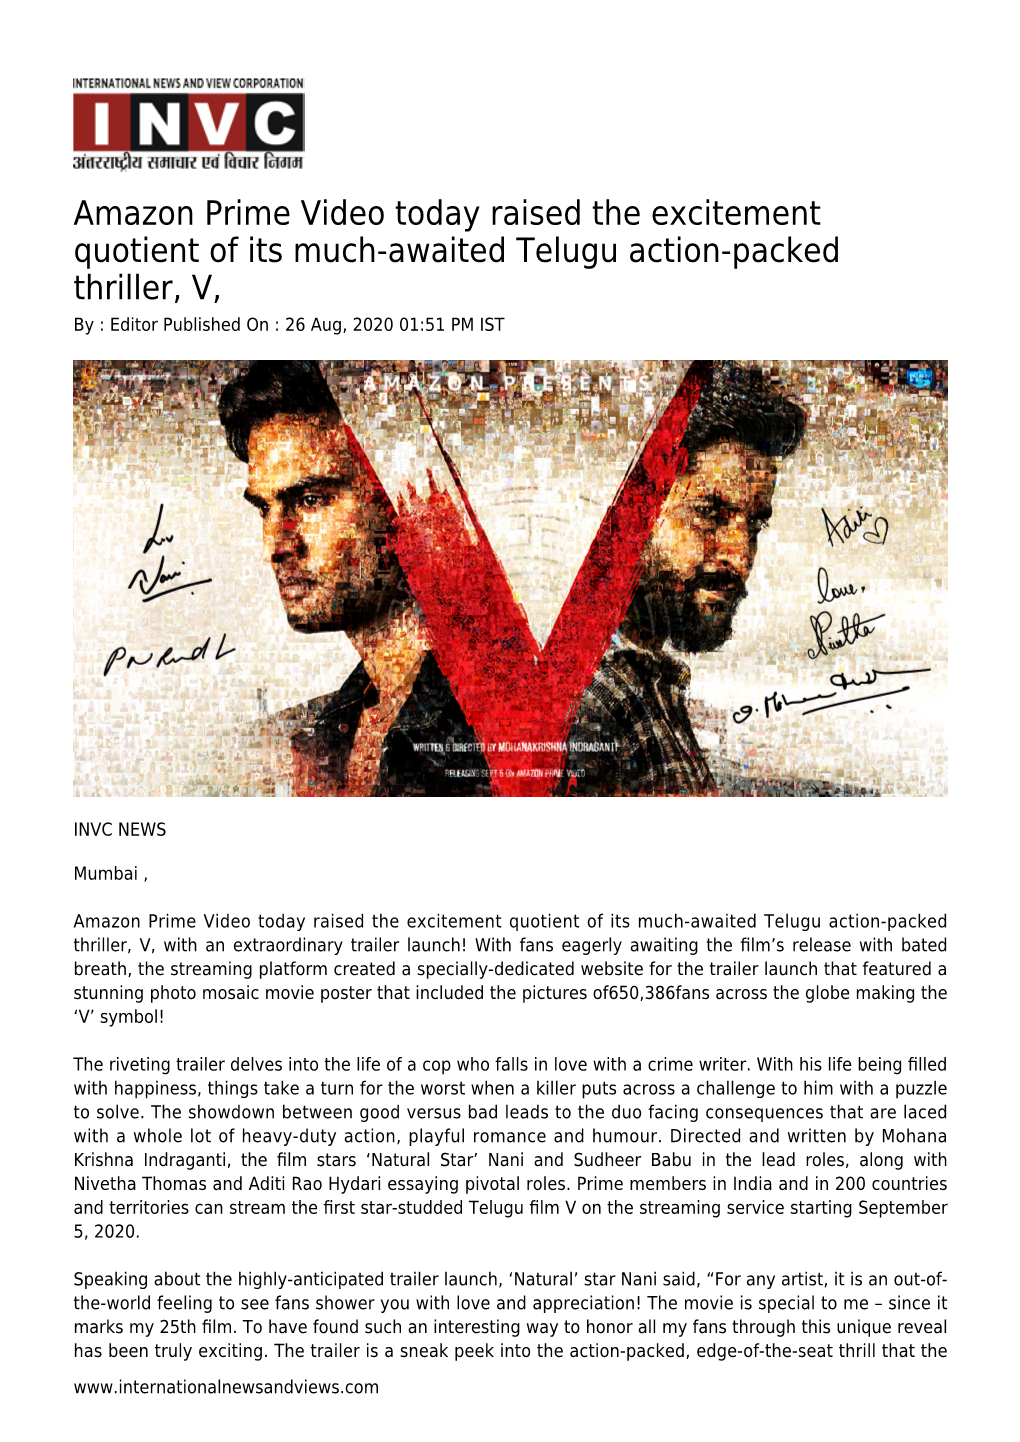 Amazon Prime Video Today Raised the Excitement Quotient of Its Much-Awaited Telugu Action-Packed Thriller, V, by : Editor Published on : 26 Aug, 2020 01:51 PM IST